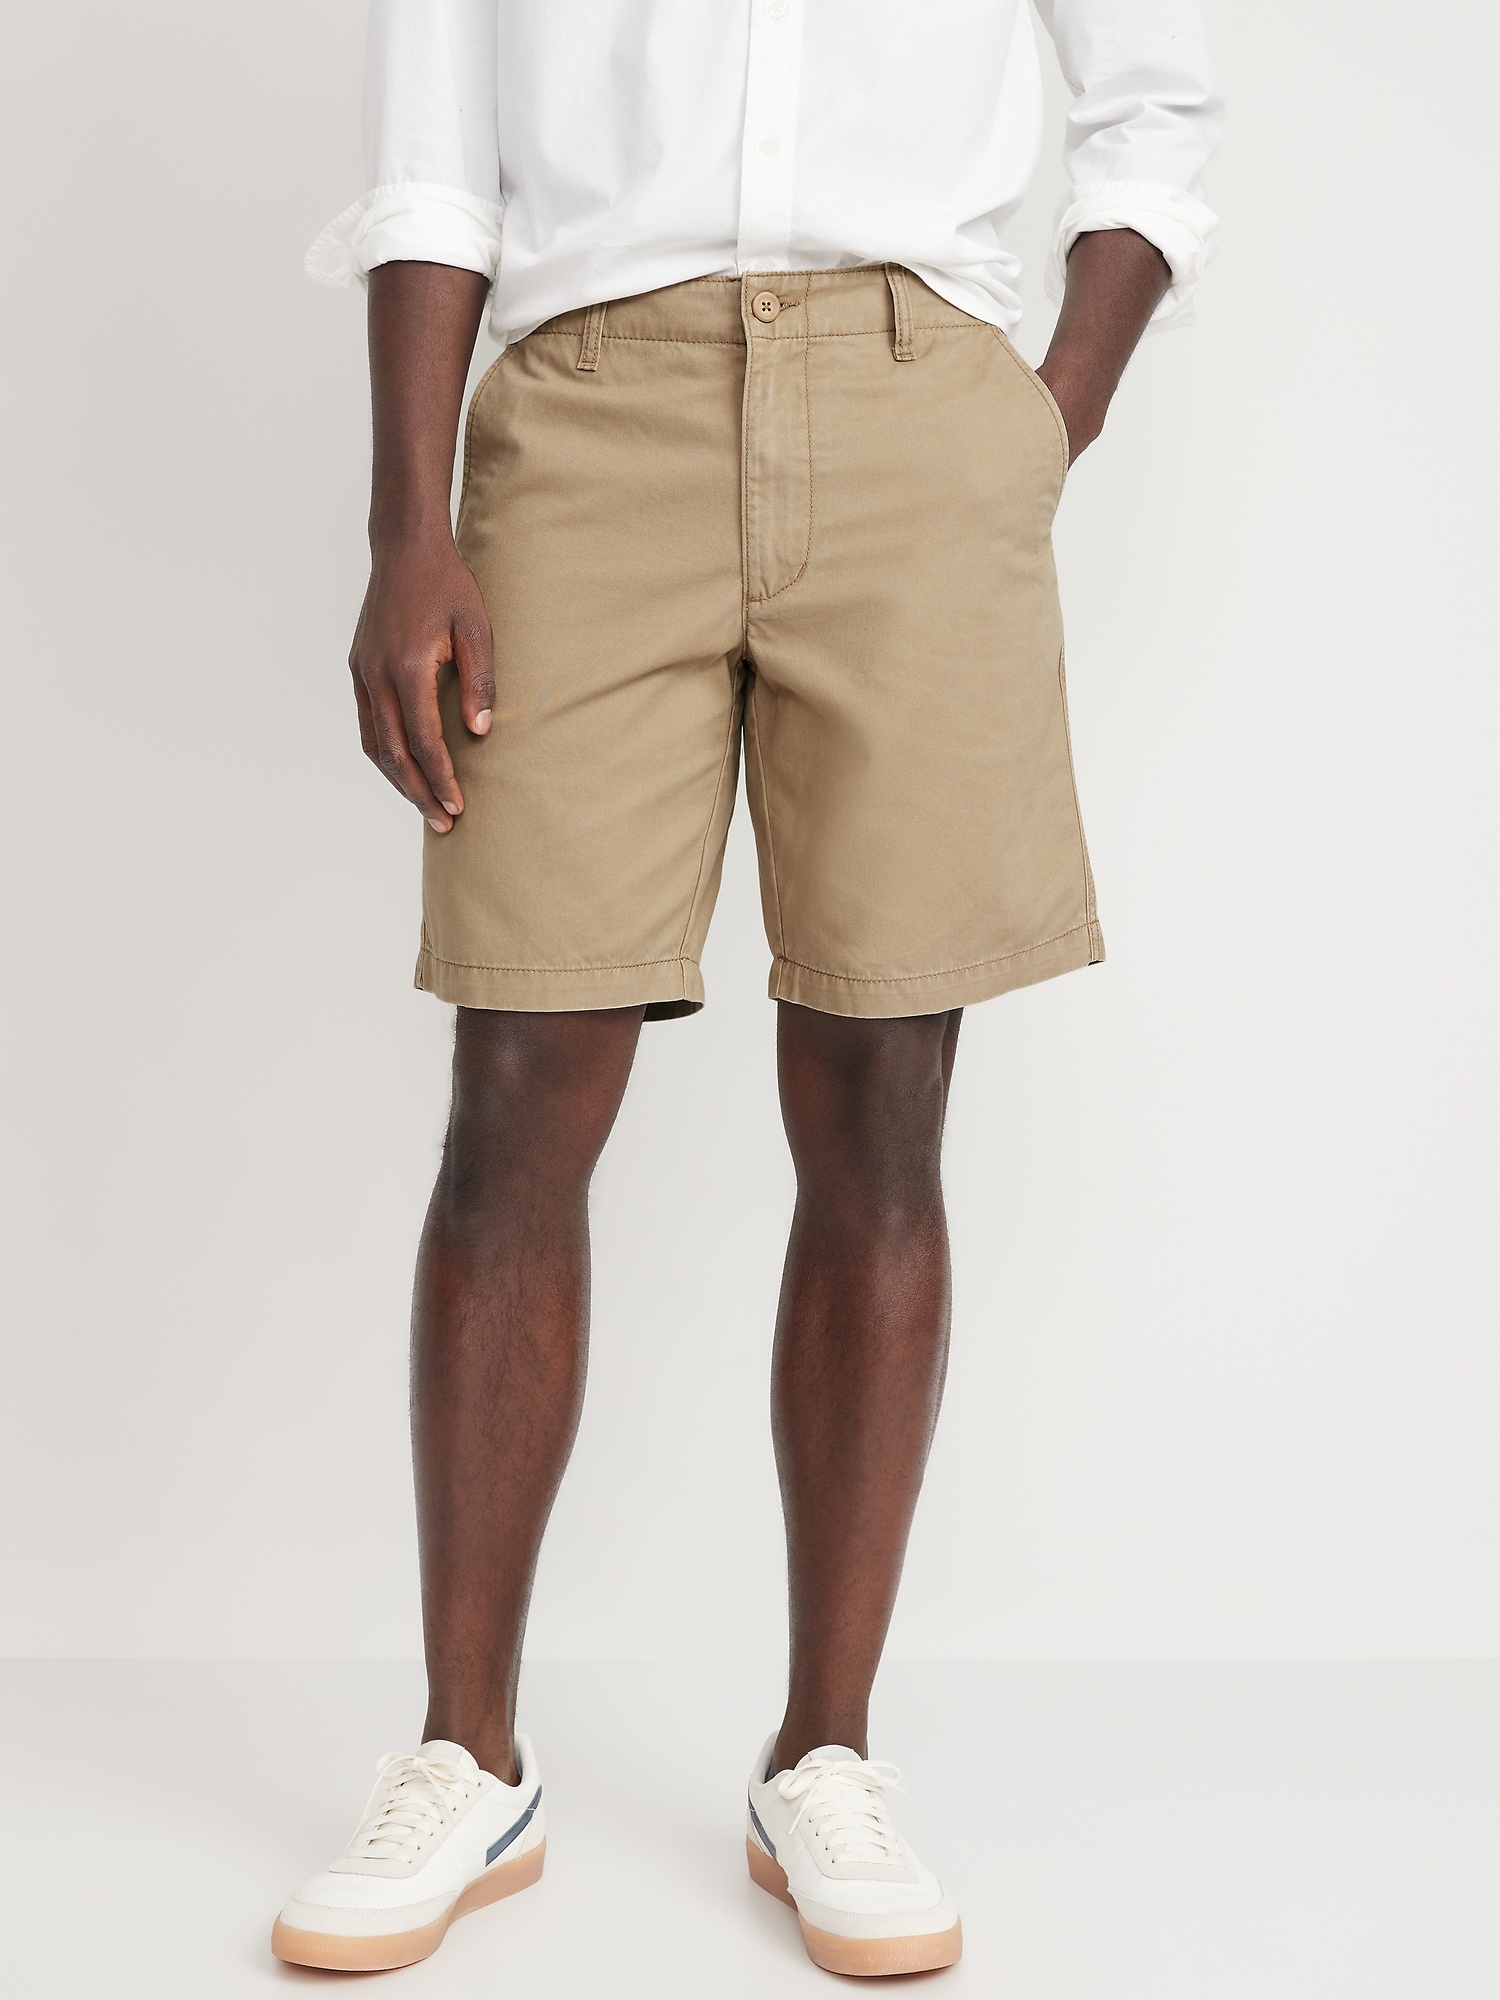 Straight Lived-In Khaki Non-Stretch Shorts for Men - 9-inch inseam ...